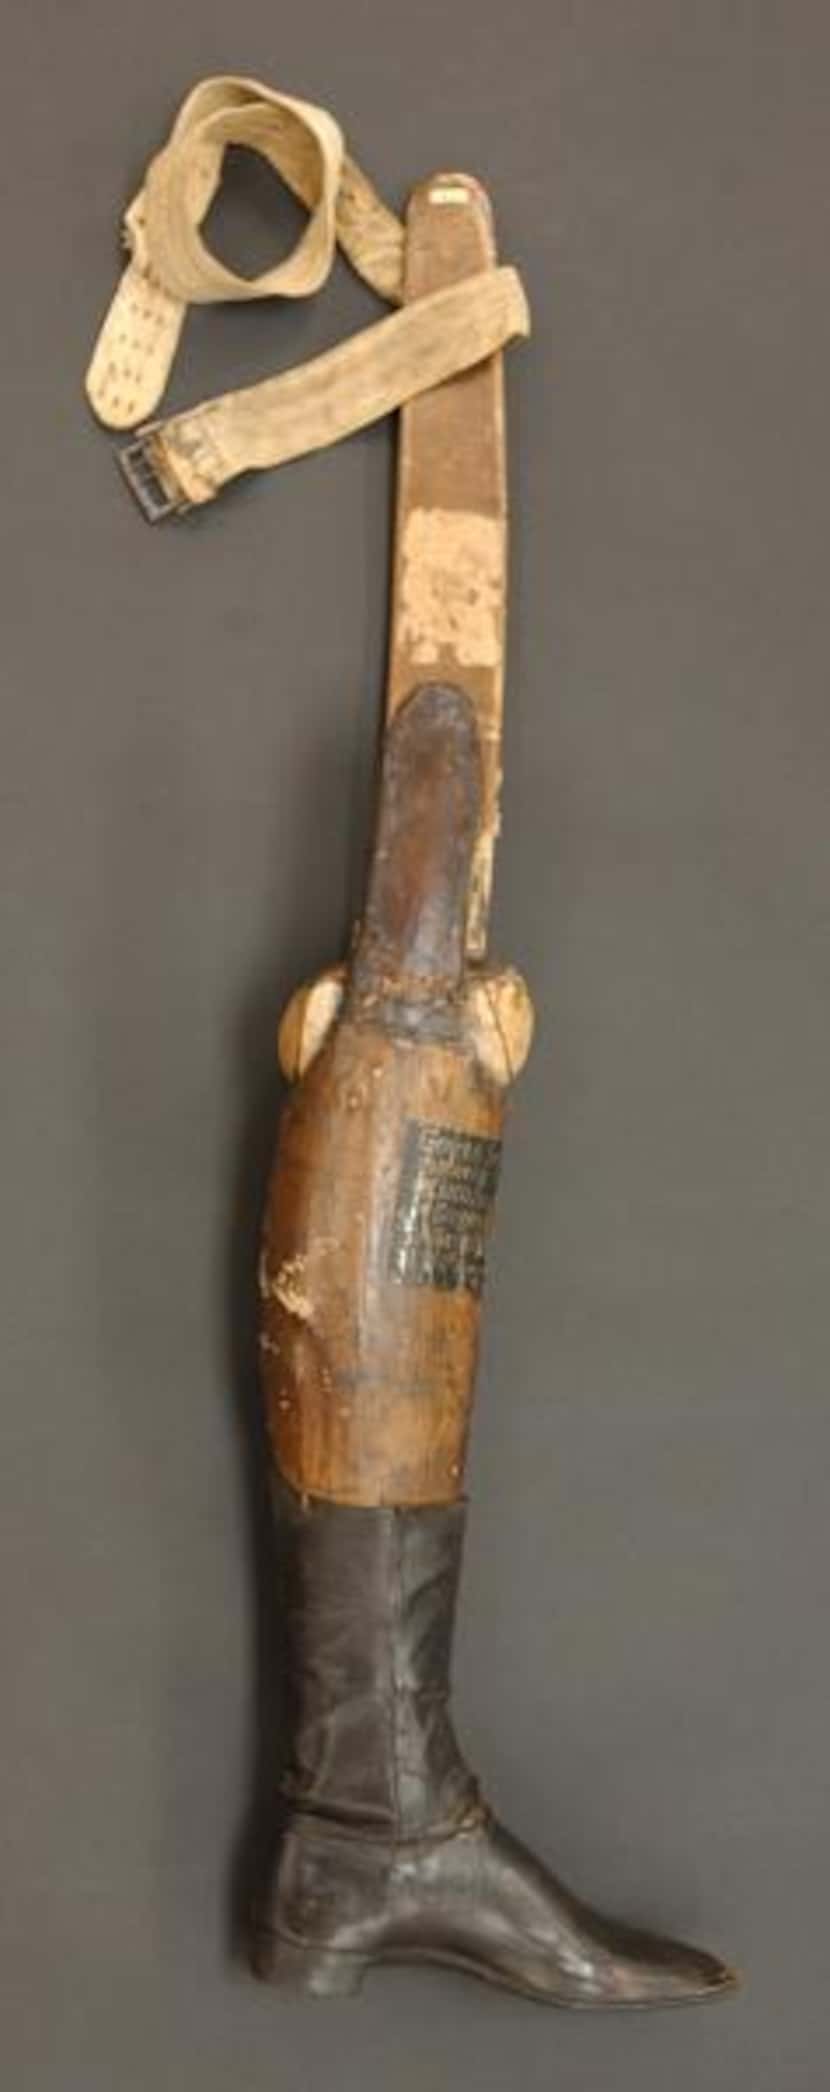 General Antonio Lopez de Santa Anna’s artificial leg, made of cork and covered in leather,...